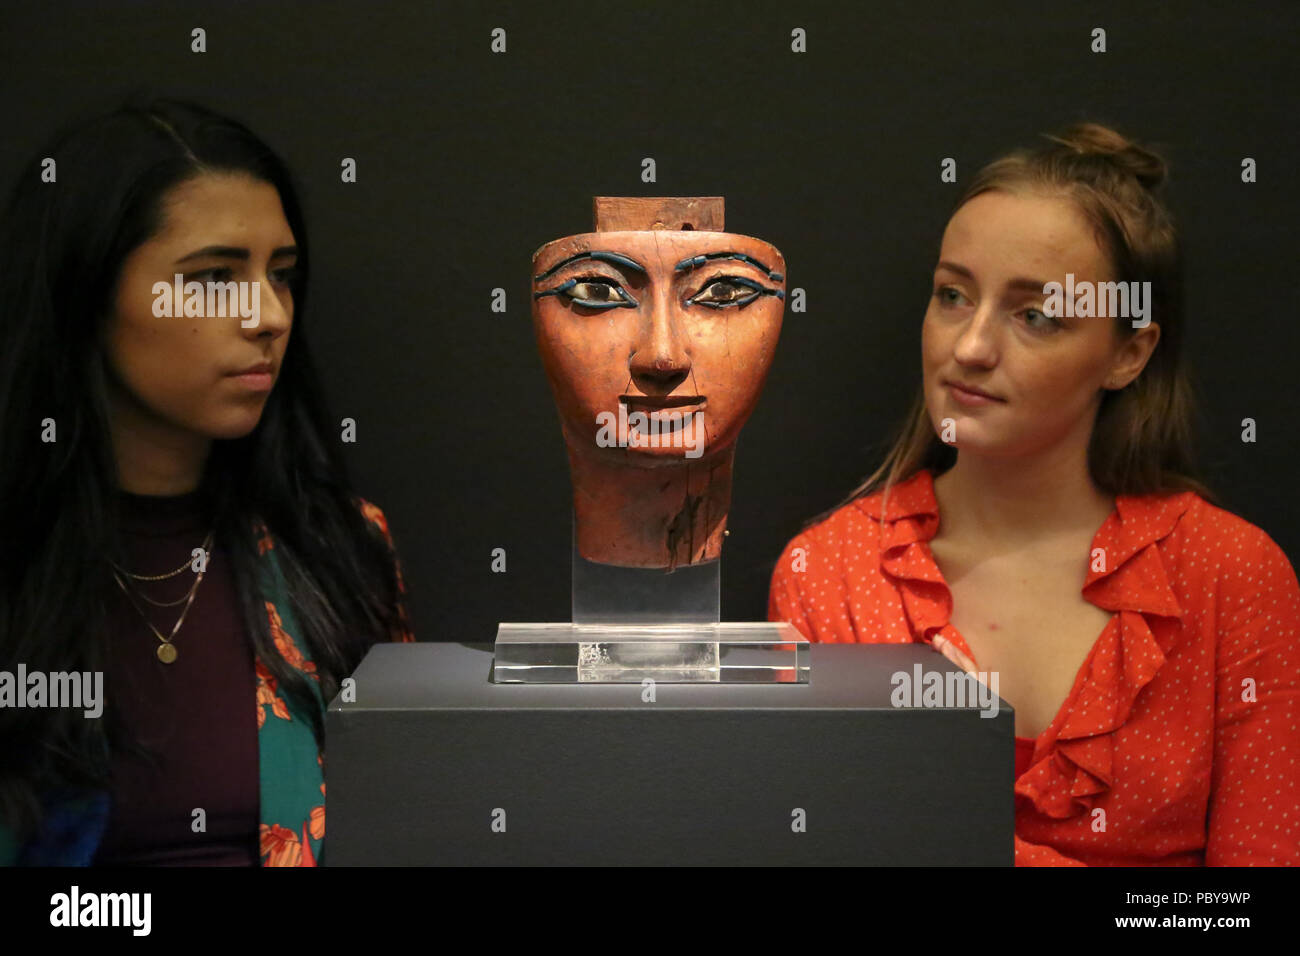 Old master & British paintings and drawings, decorative arts, sculptures and antiquities spanning over two Millennia on auction at Sotheby’s London.  Featuring: Two women looks at Ab Egyptian polychrome Wood Mummy Mask, 21st/22nd Dynasty, 1075-716 B.C (Est £100, 000 - 150, 000). Where: London, United Kingdom When: 29 Jun 2018 Credit: Dinendra Haria/WENN Stock Photo